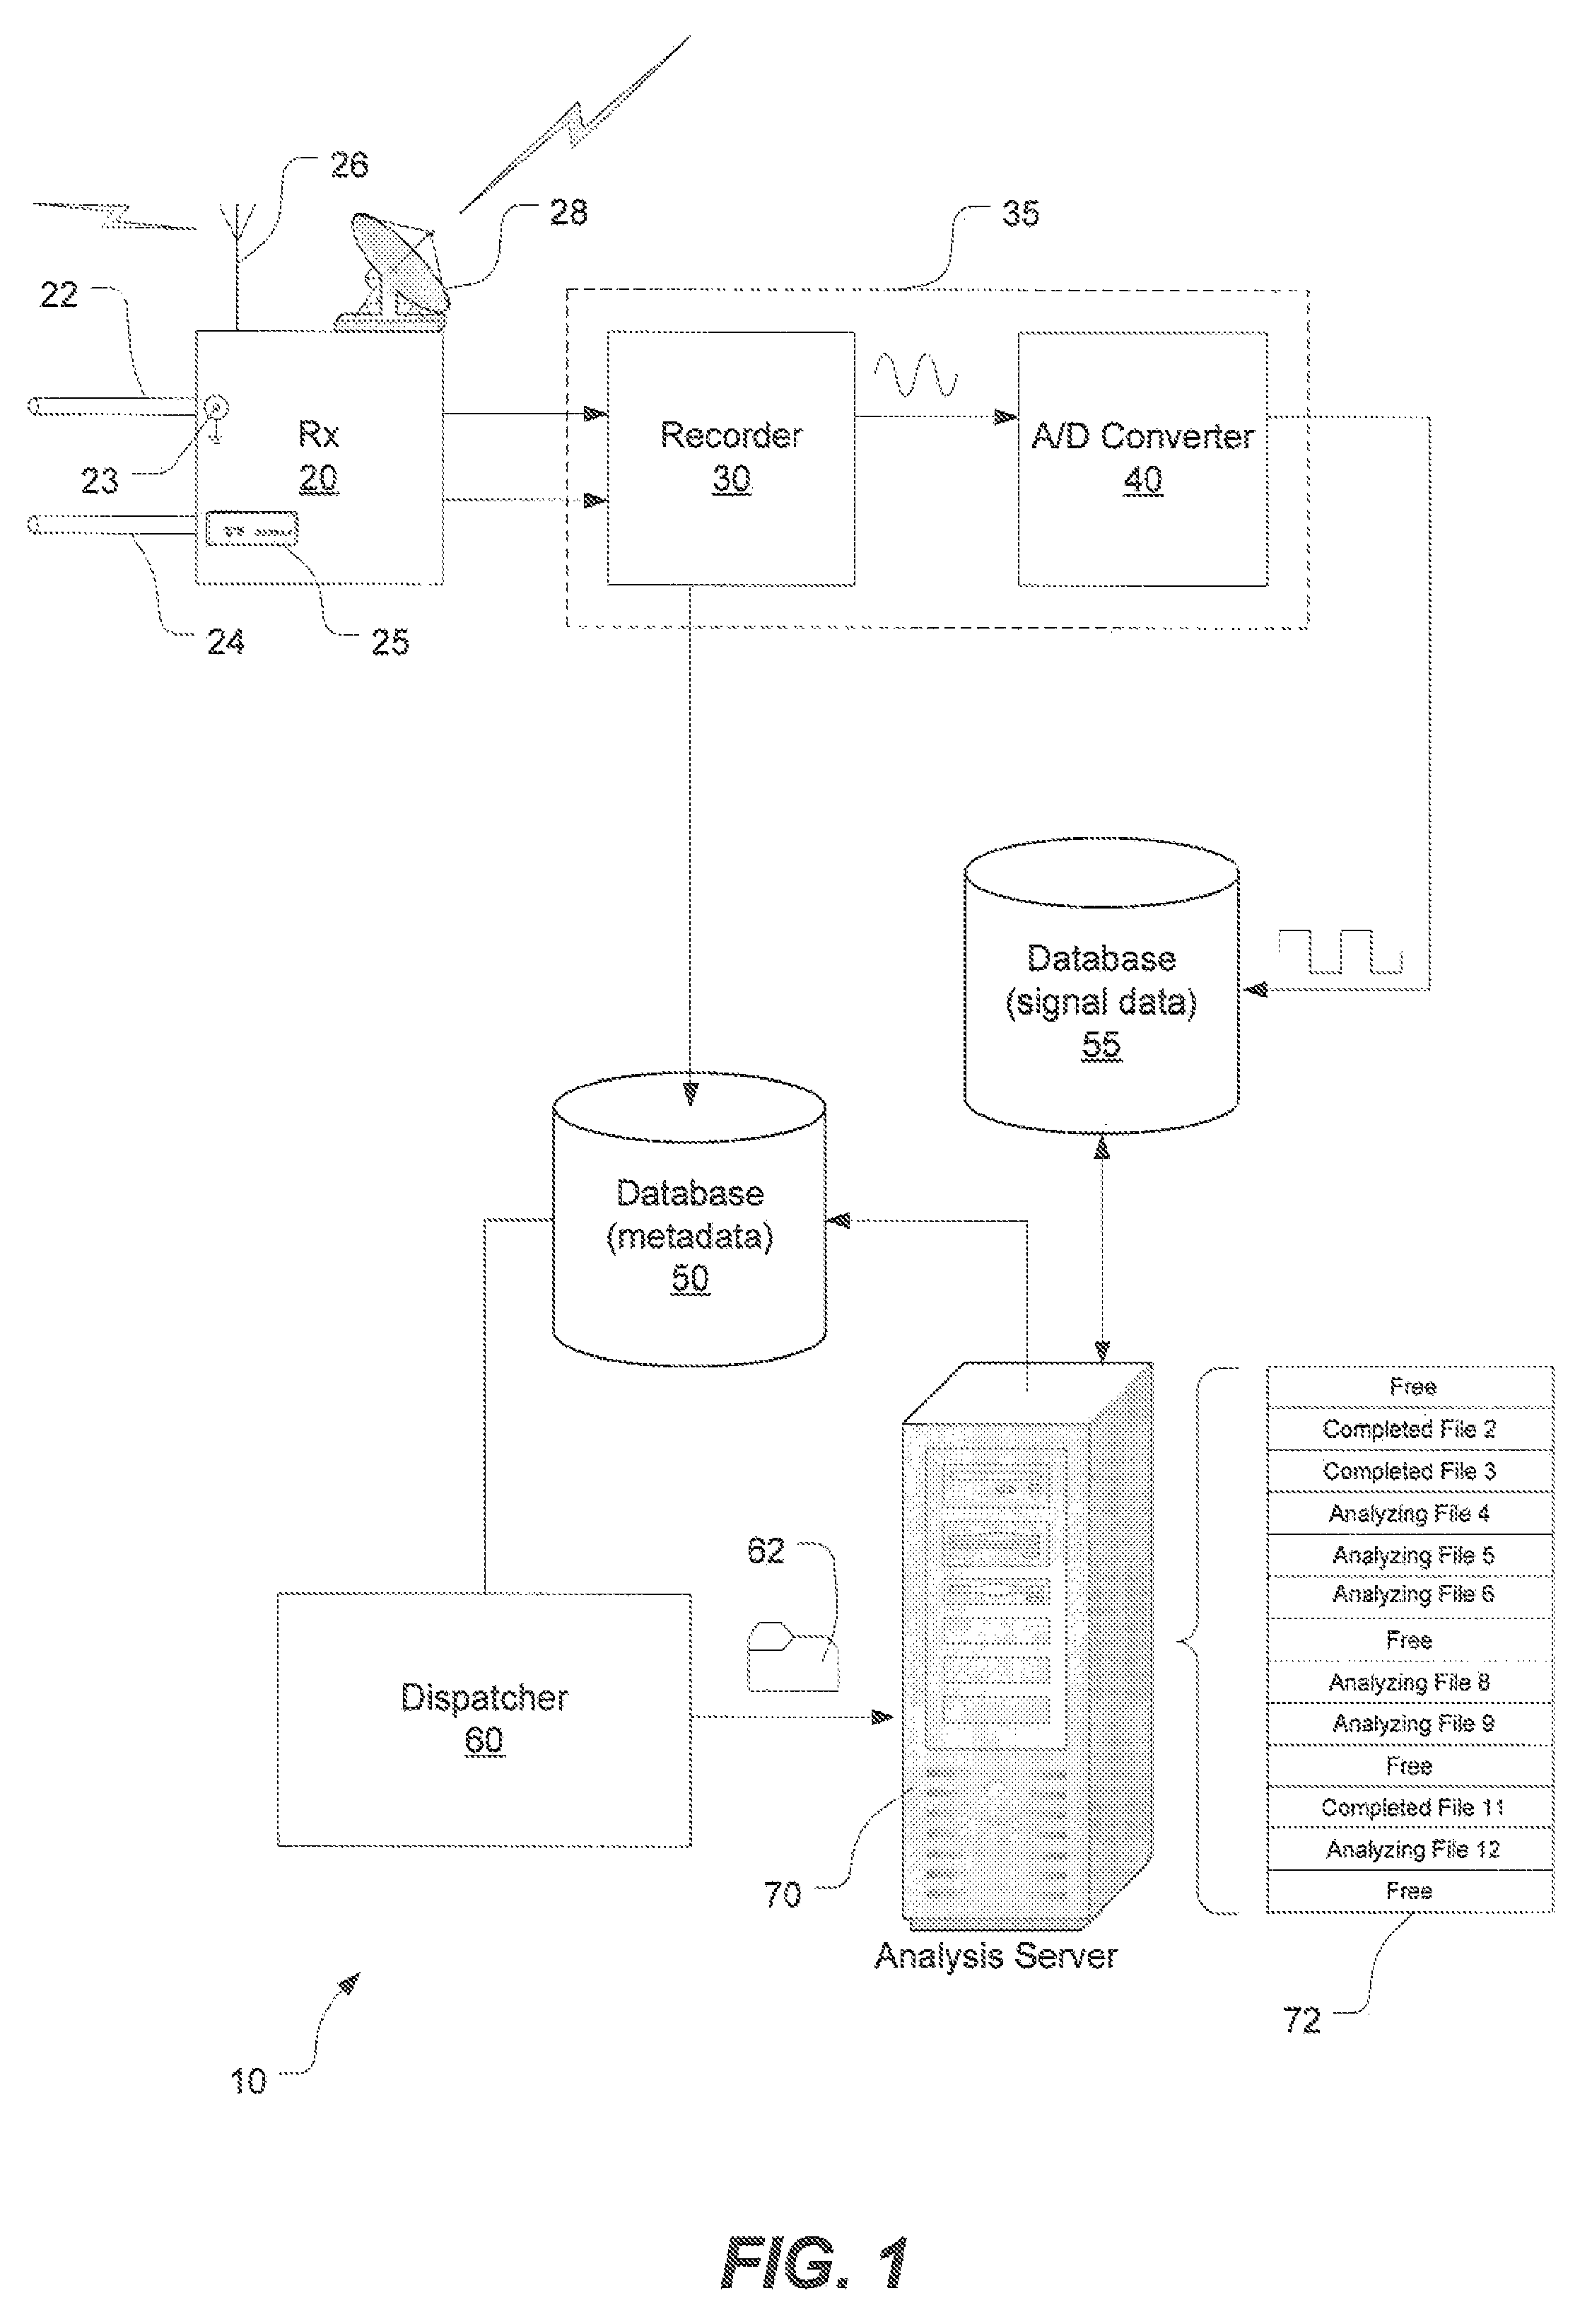 Method and System for automated auditing of advertising